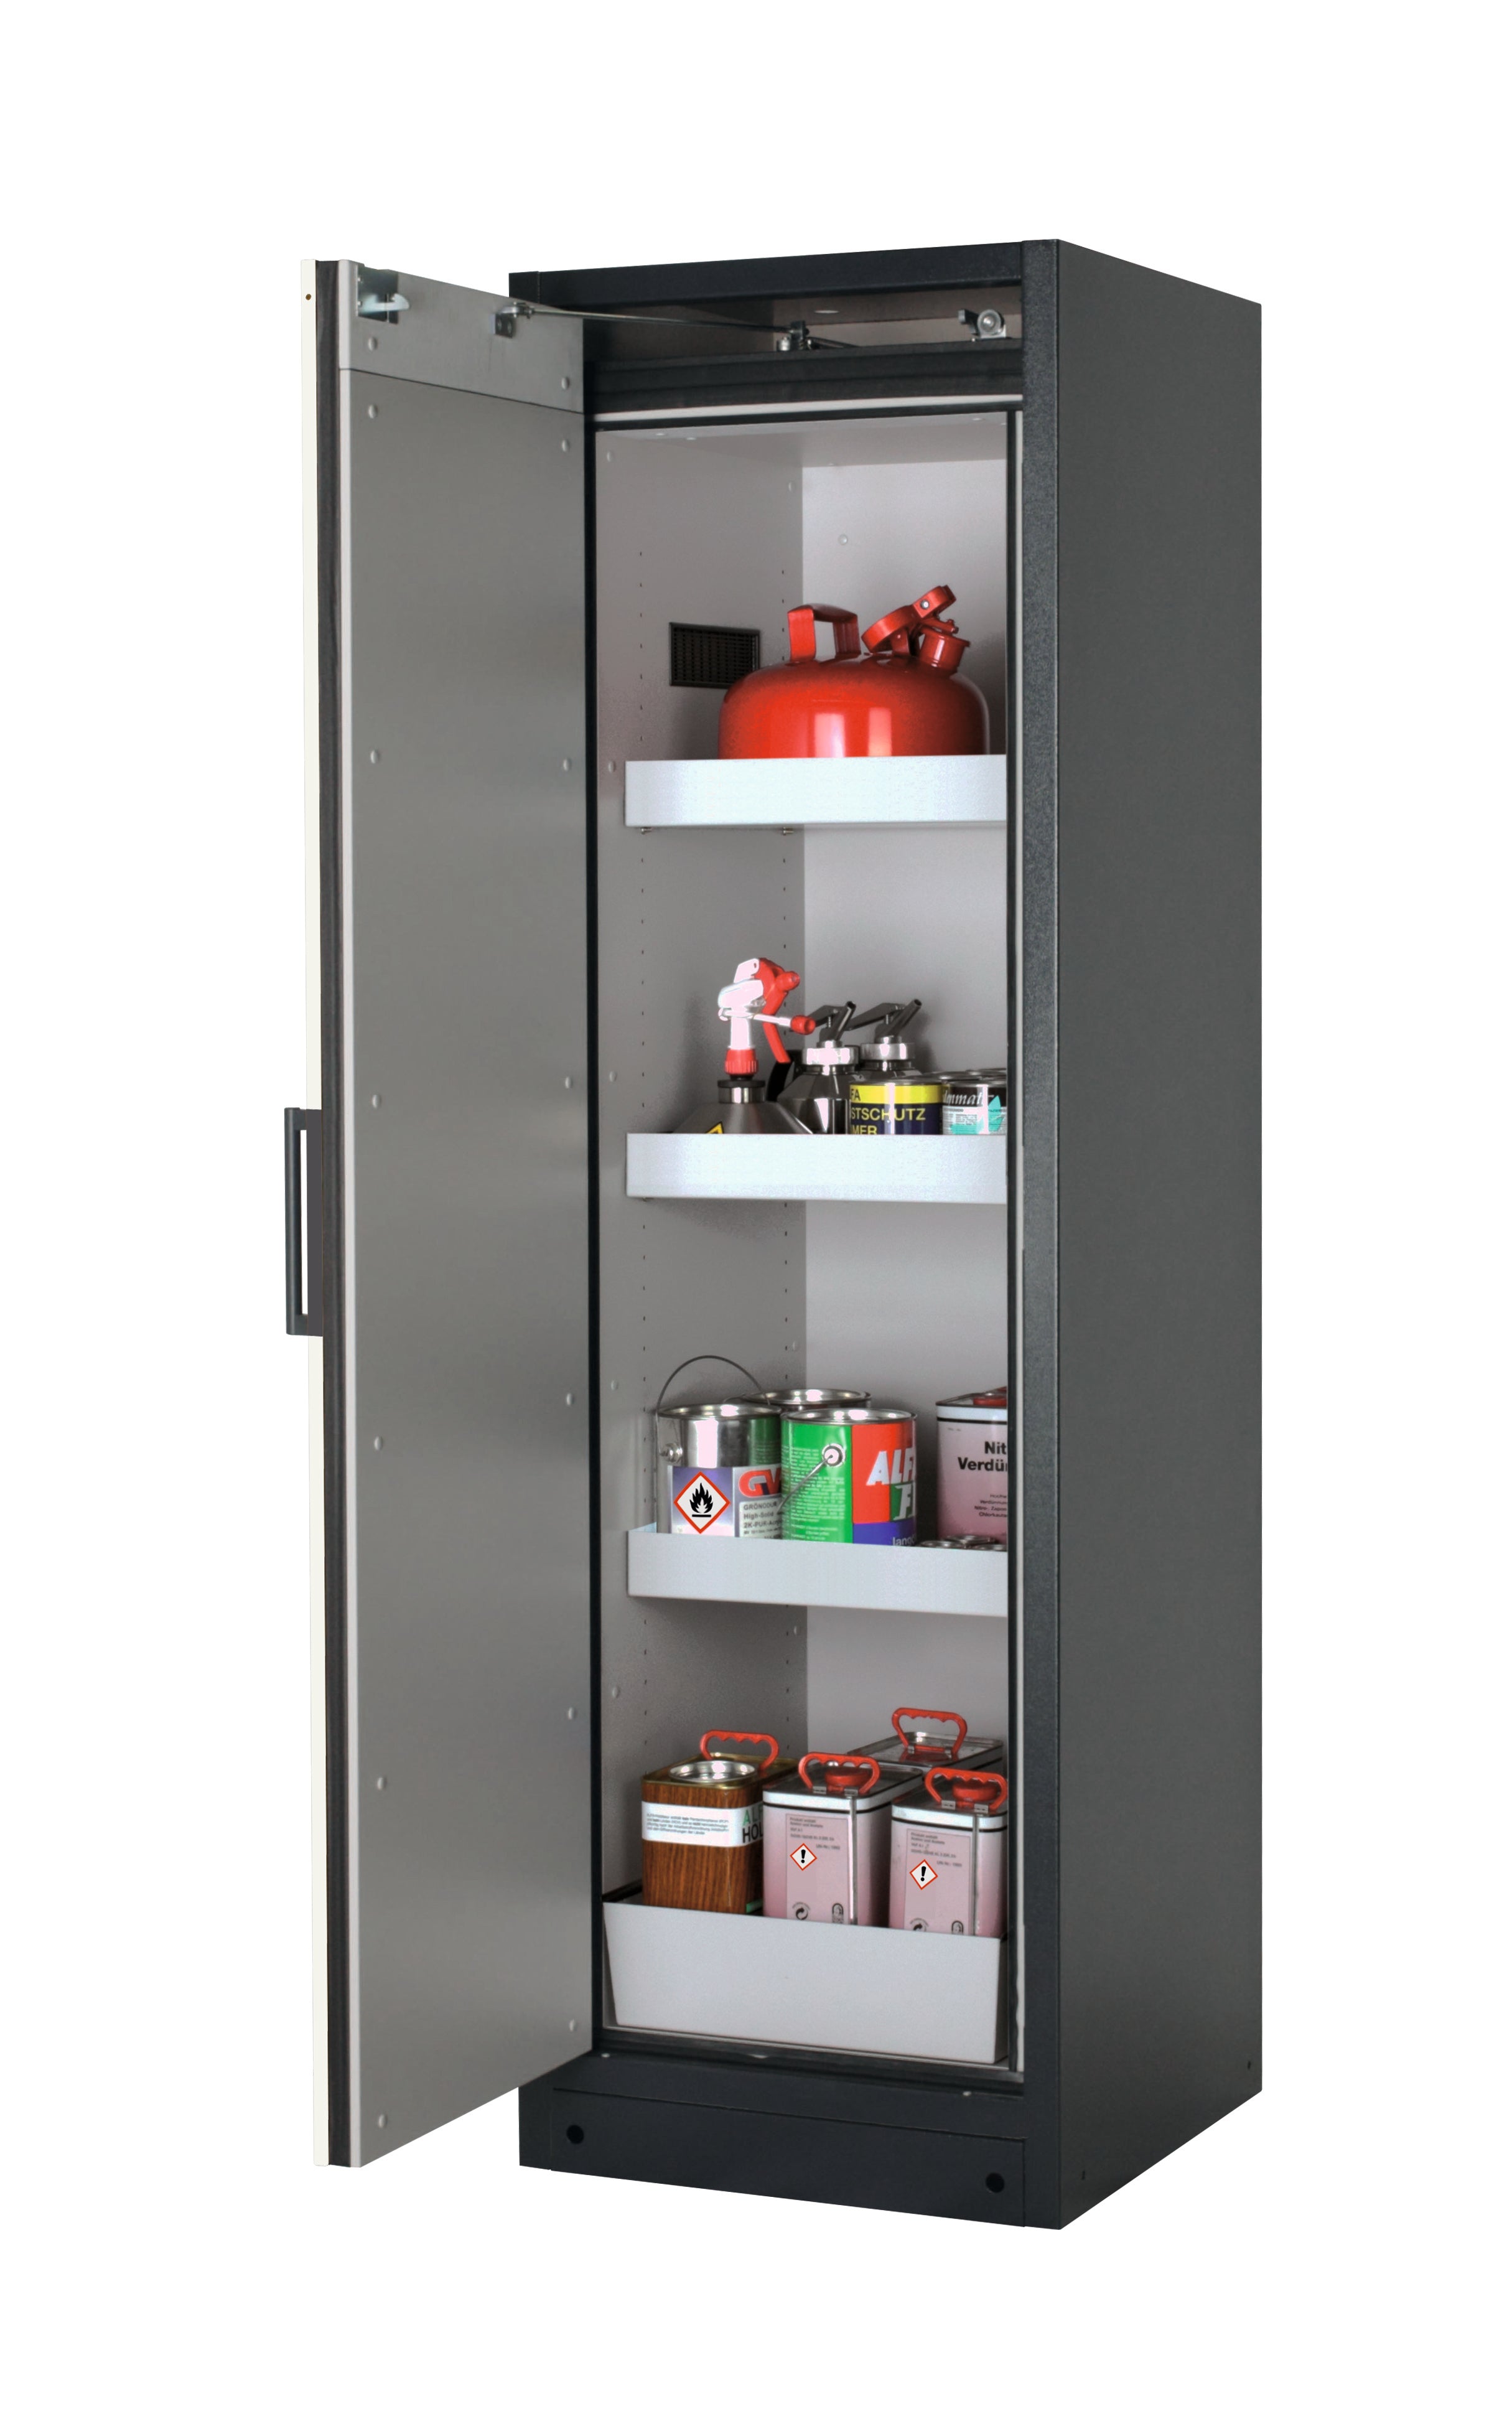 Type 90 safety storage cabinet Q-CLASSIC-90 model Q90.195.060 in asecos silver with 3x tray shelf (standard) (sheet steel),